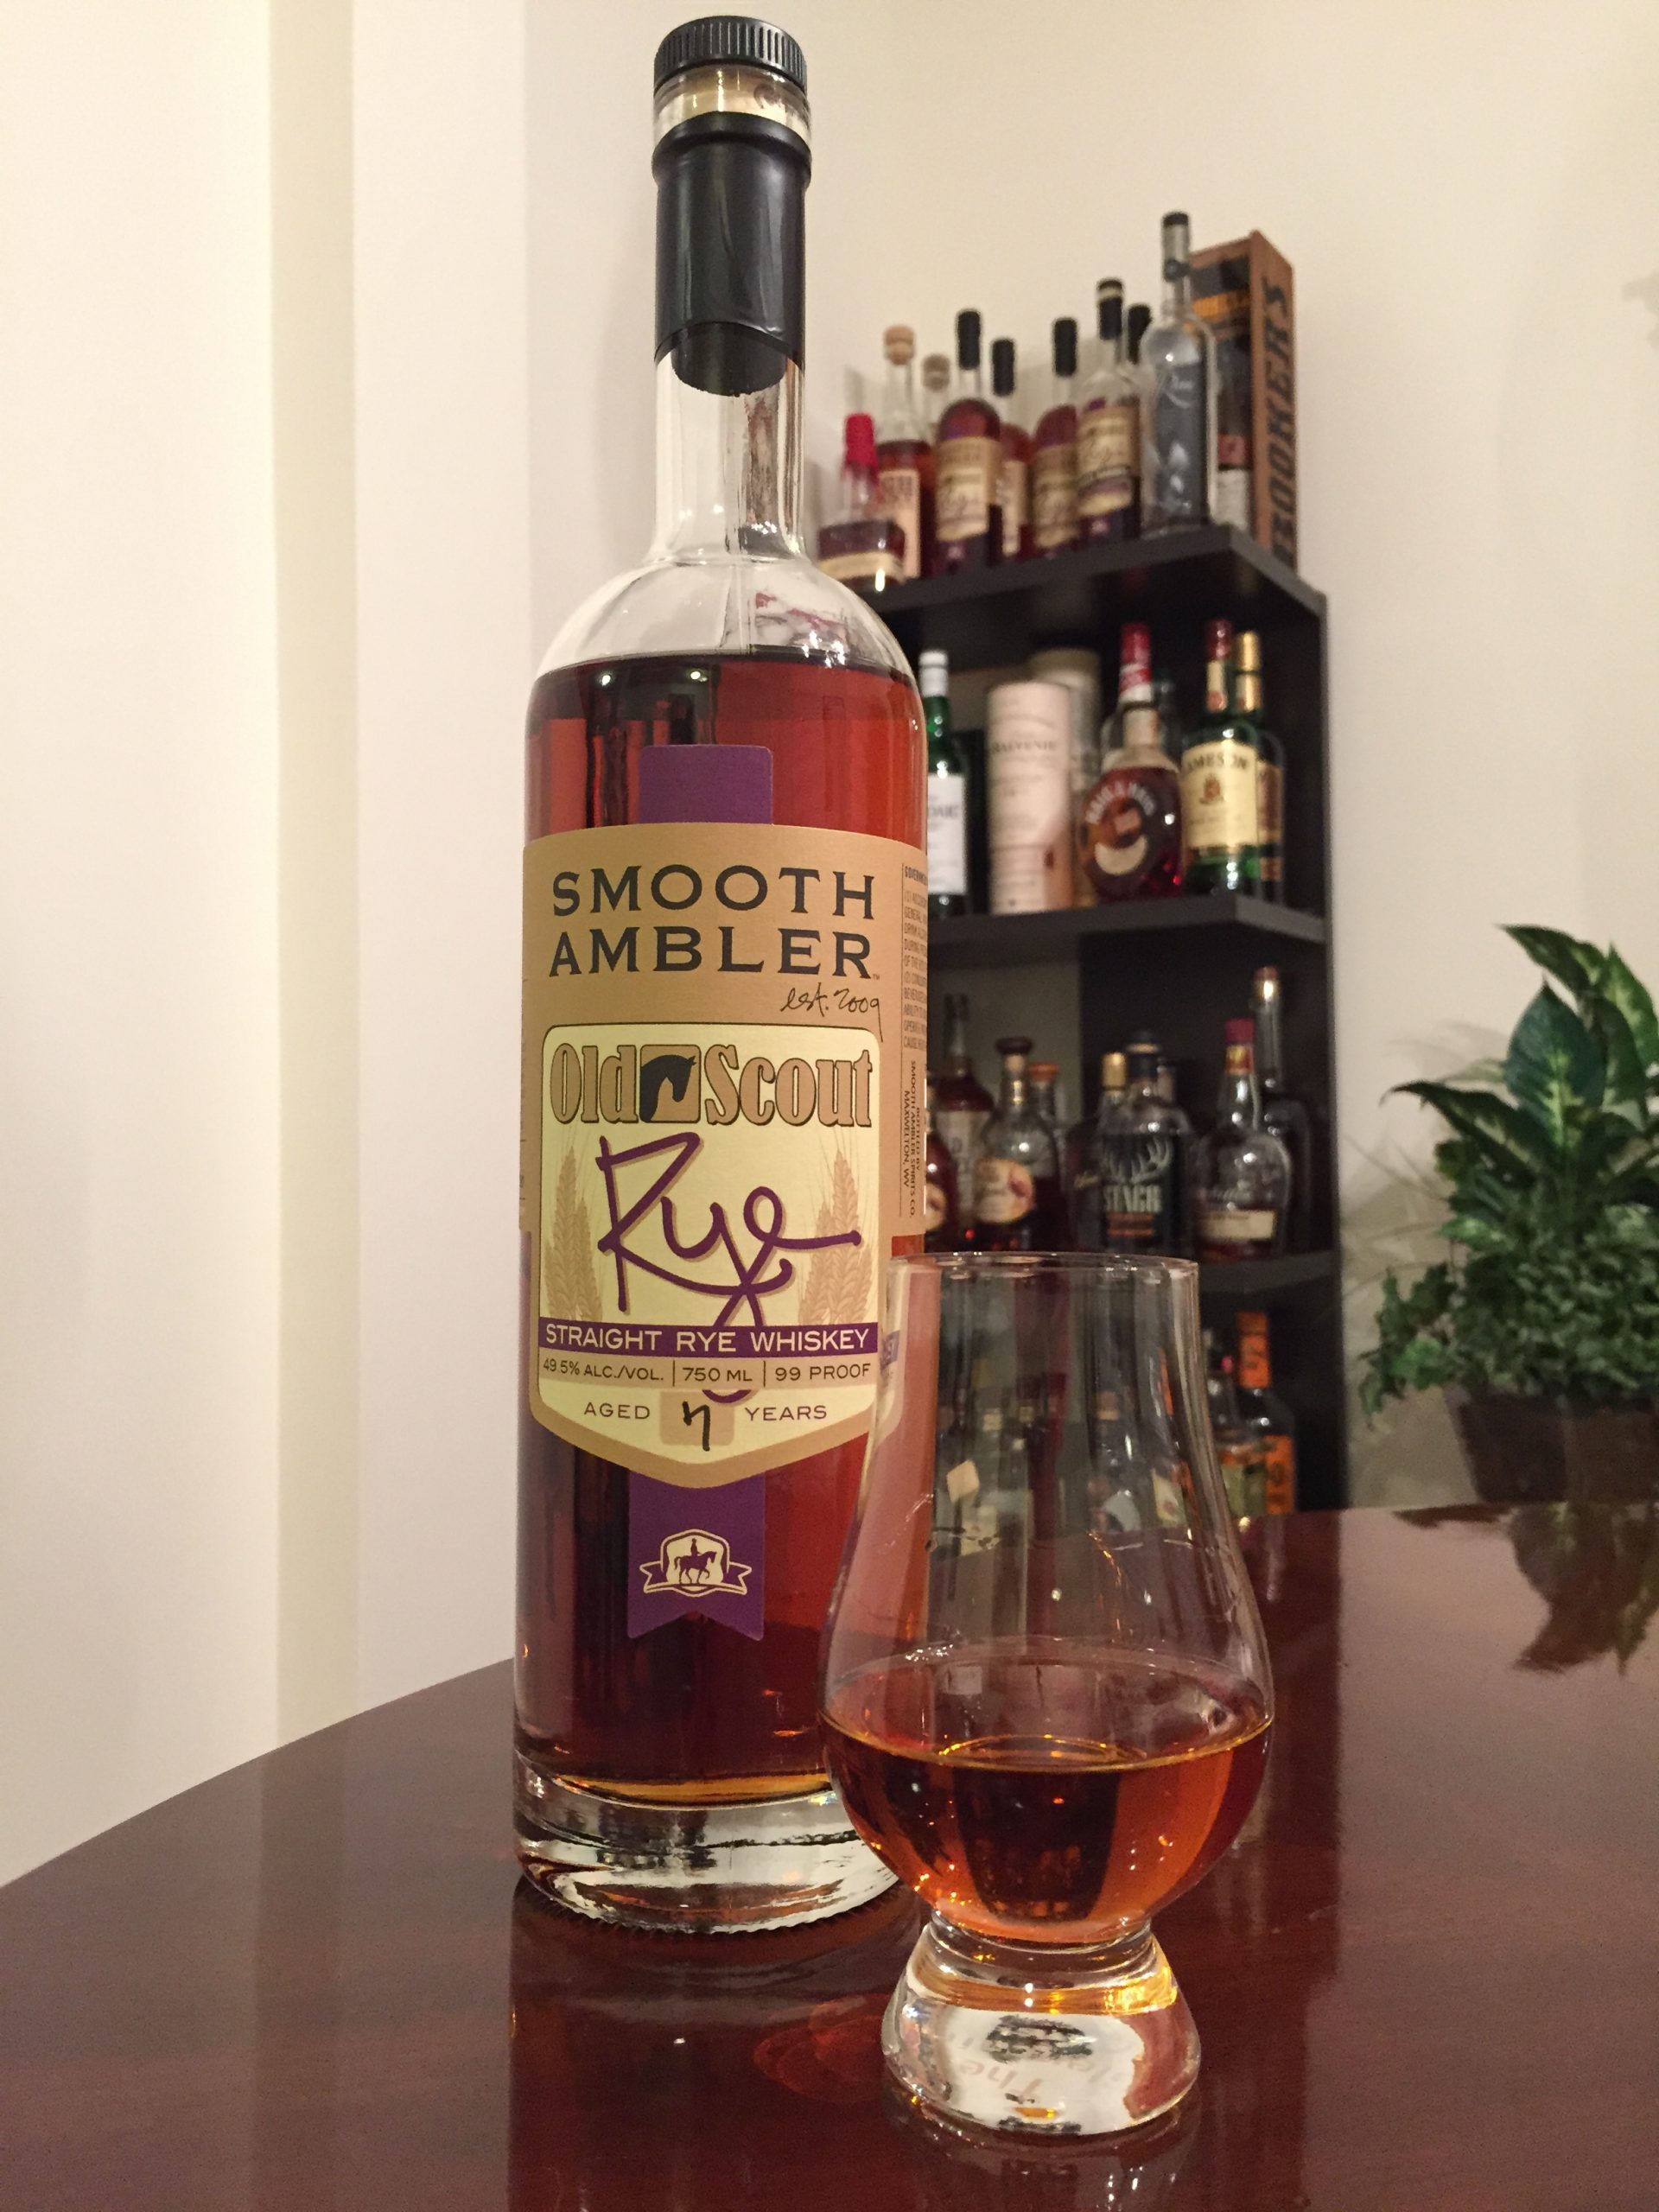 Smooth Ambler Old Scout 7 Year Straight Rye Whiskey ...